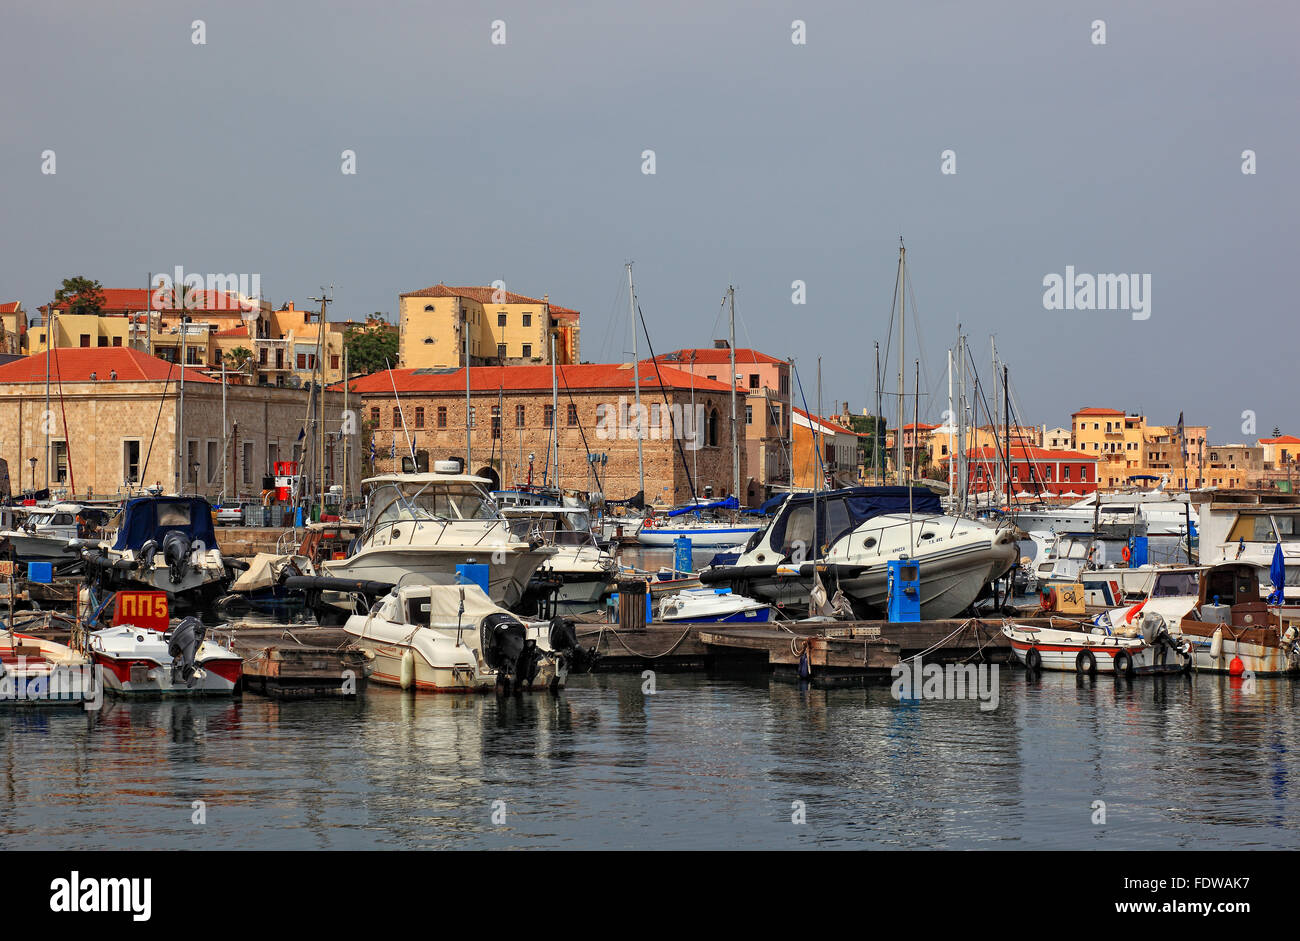 Crete, port Chania, Old Town and boats in the Venetian harbour Stock Photo